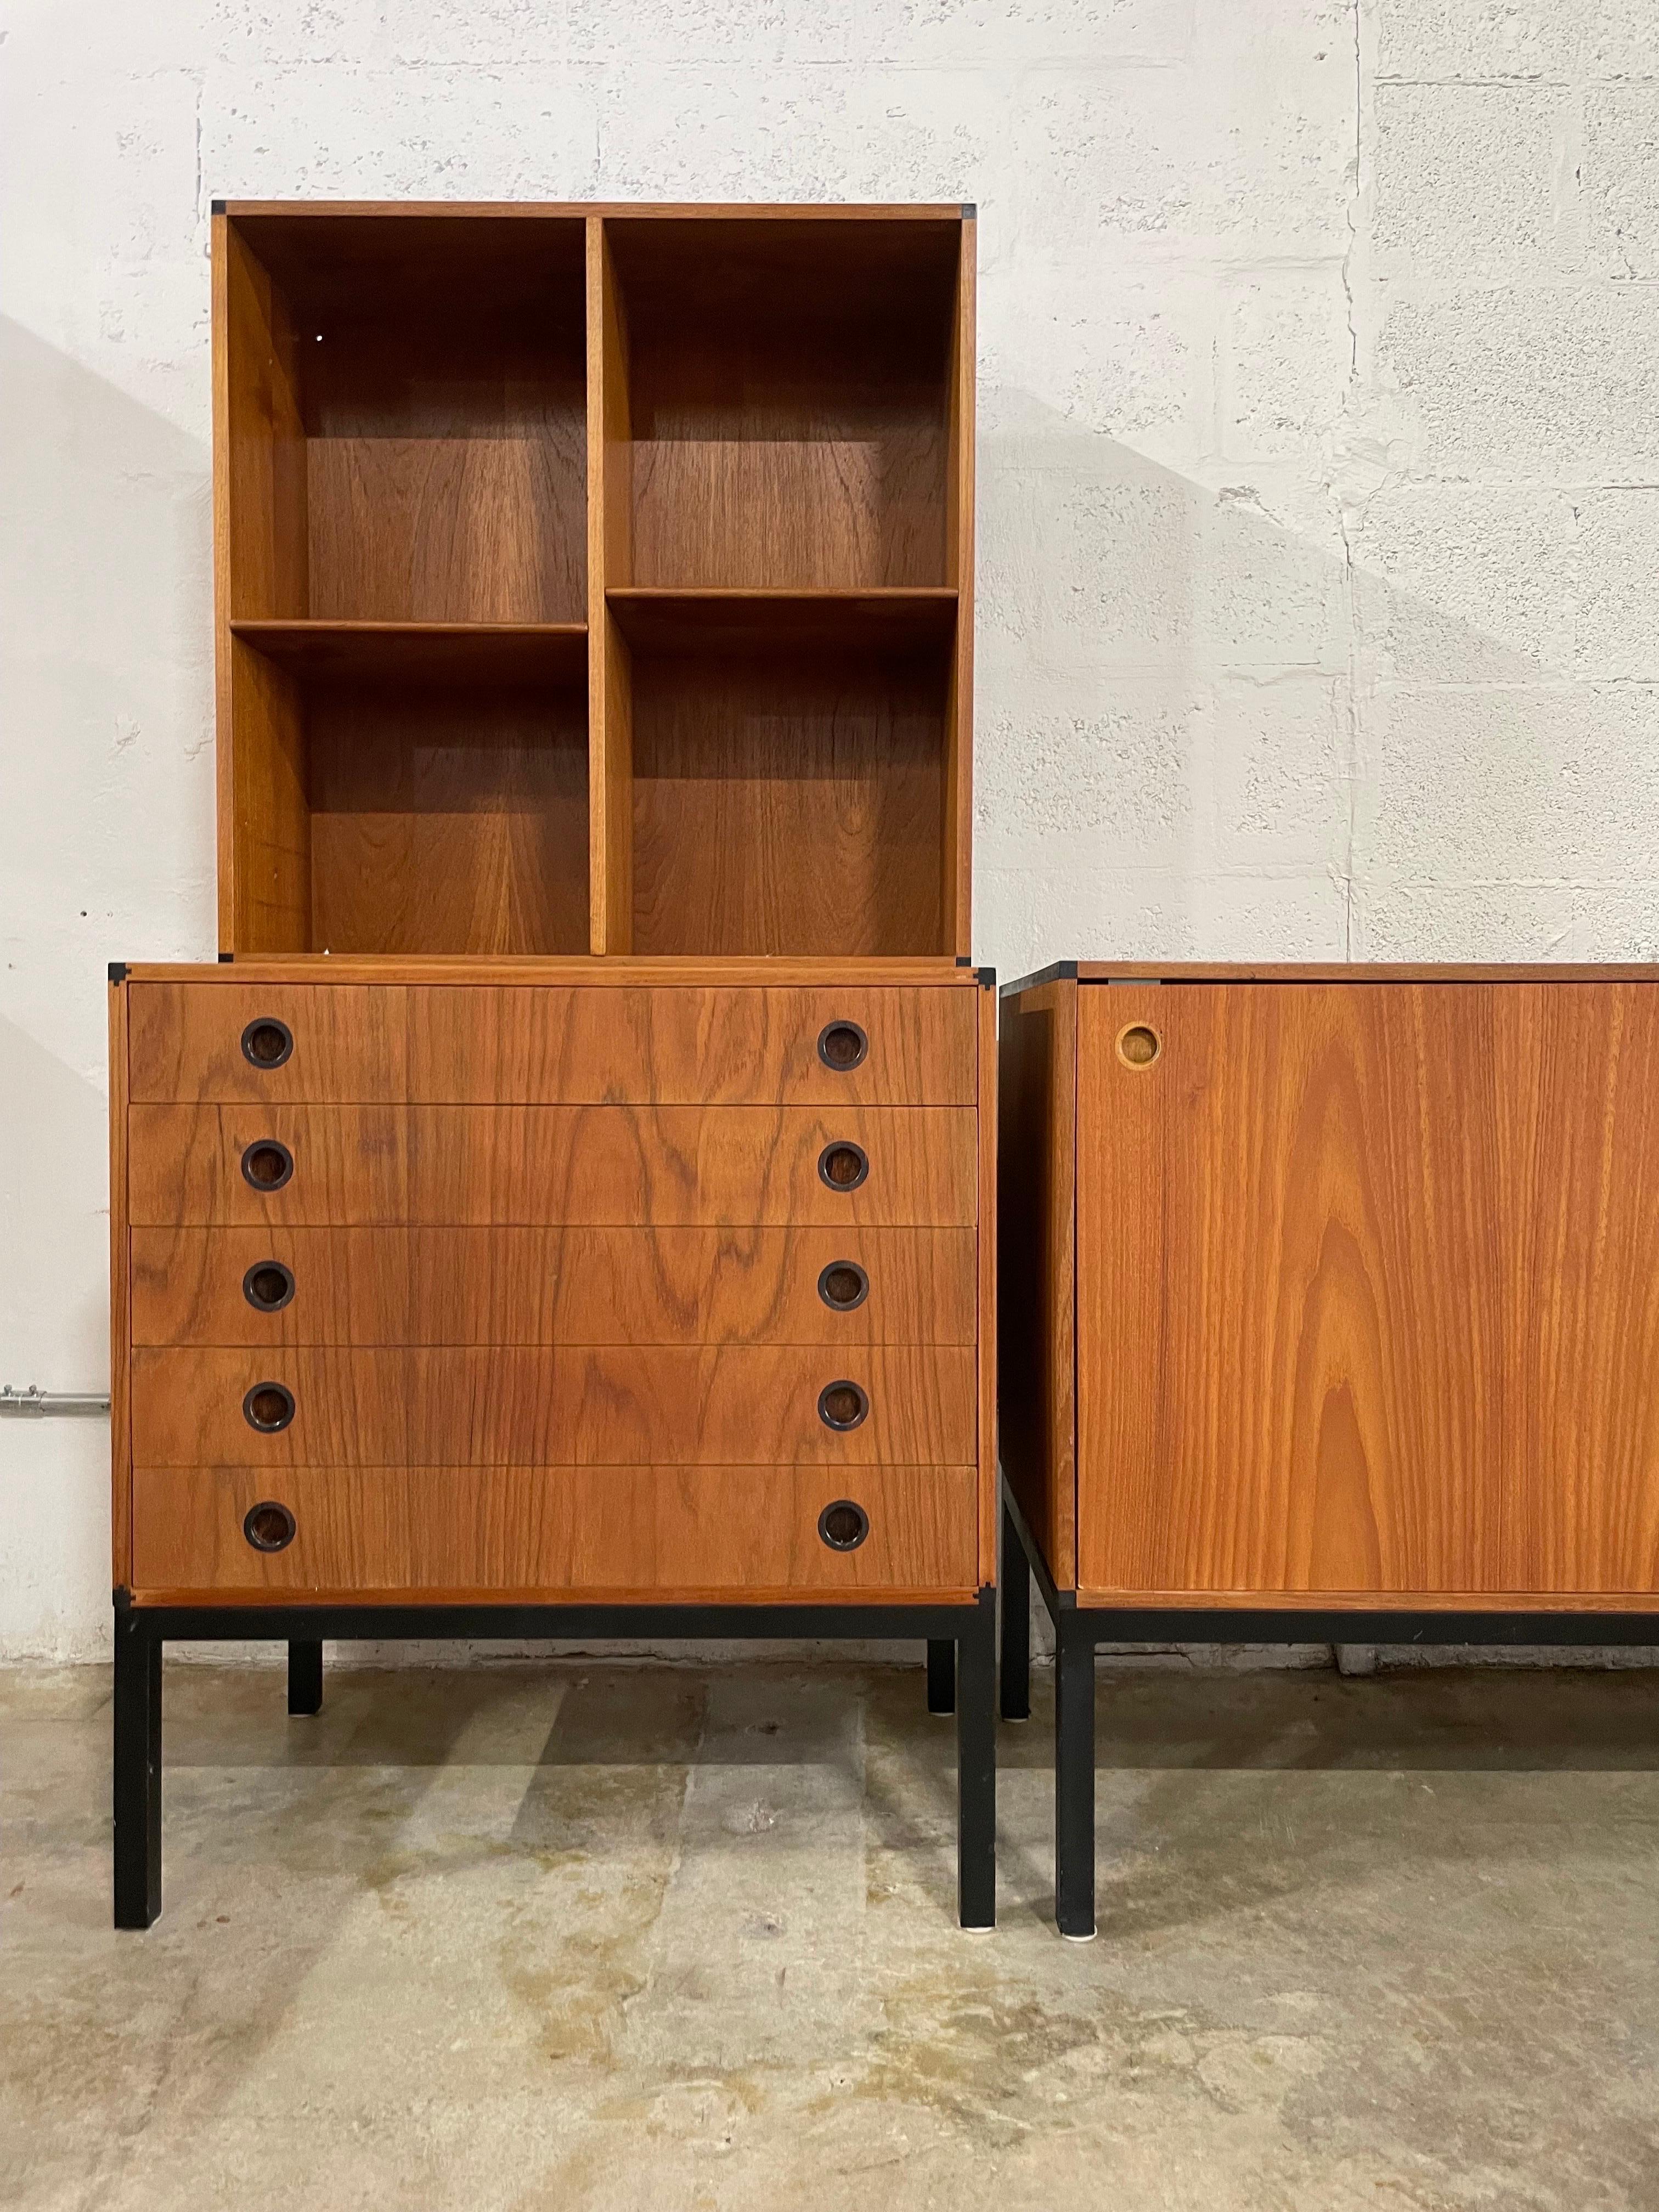 3-piece Shelving Unit by Hans Hove & Palle Petersen for Christian Linneberg. Credenza or Console, chest and shelves. 
Console 50w 17d 28h 
Chest 25w 17d 28h
Top 25w 8.75d 25.5h